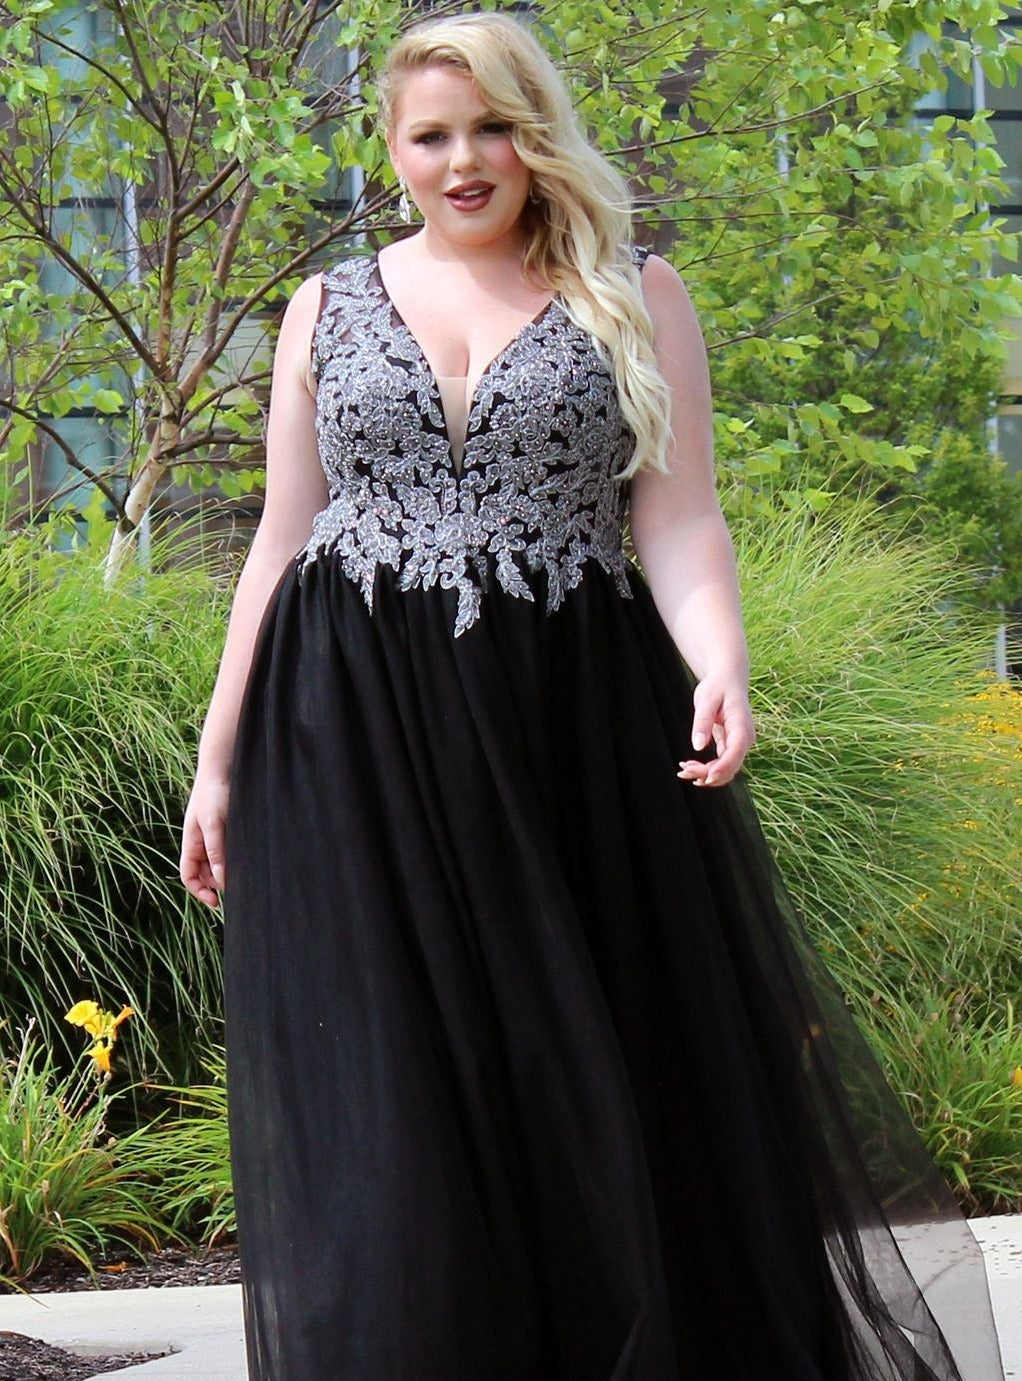 Sydney's Closet SC7298 V neckline sleeveless embellished applique lace bodice and tulle skirt prom dress evening gown ball gown  Available colors: Black Silver  Available sizes:  14, 16, 18, 20, 22, 24, 26, 28, 30, 32, 34, 36, 38, 40 